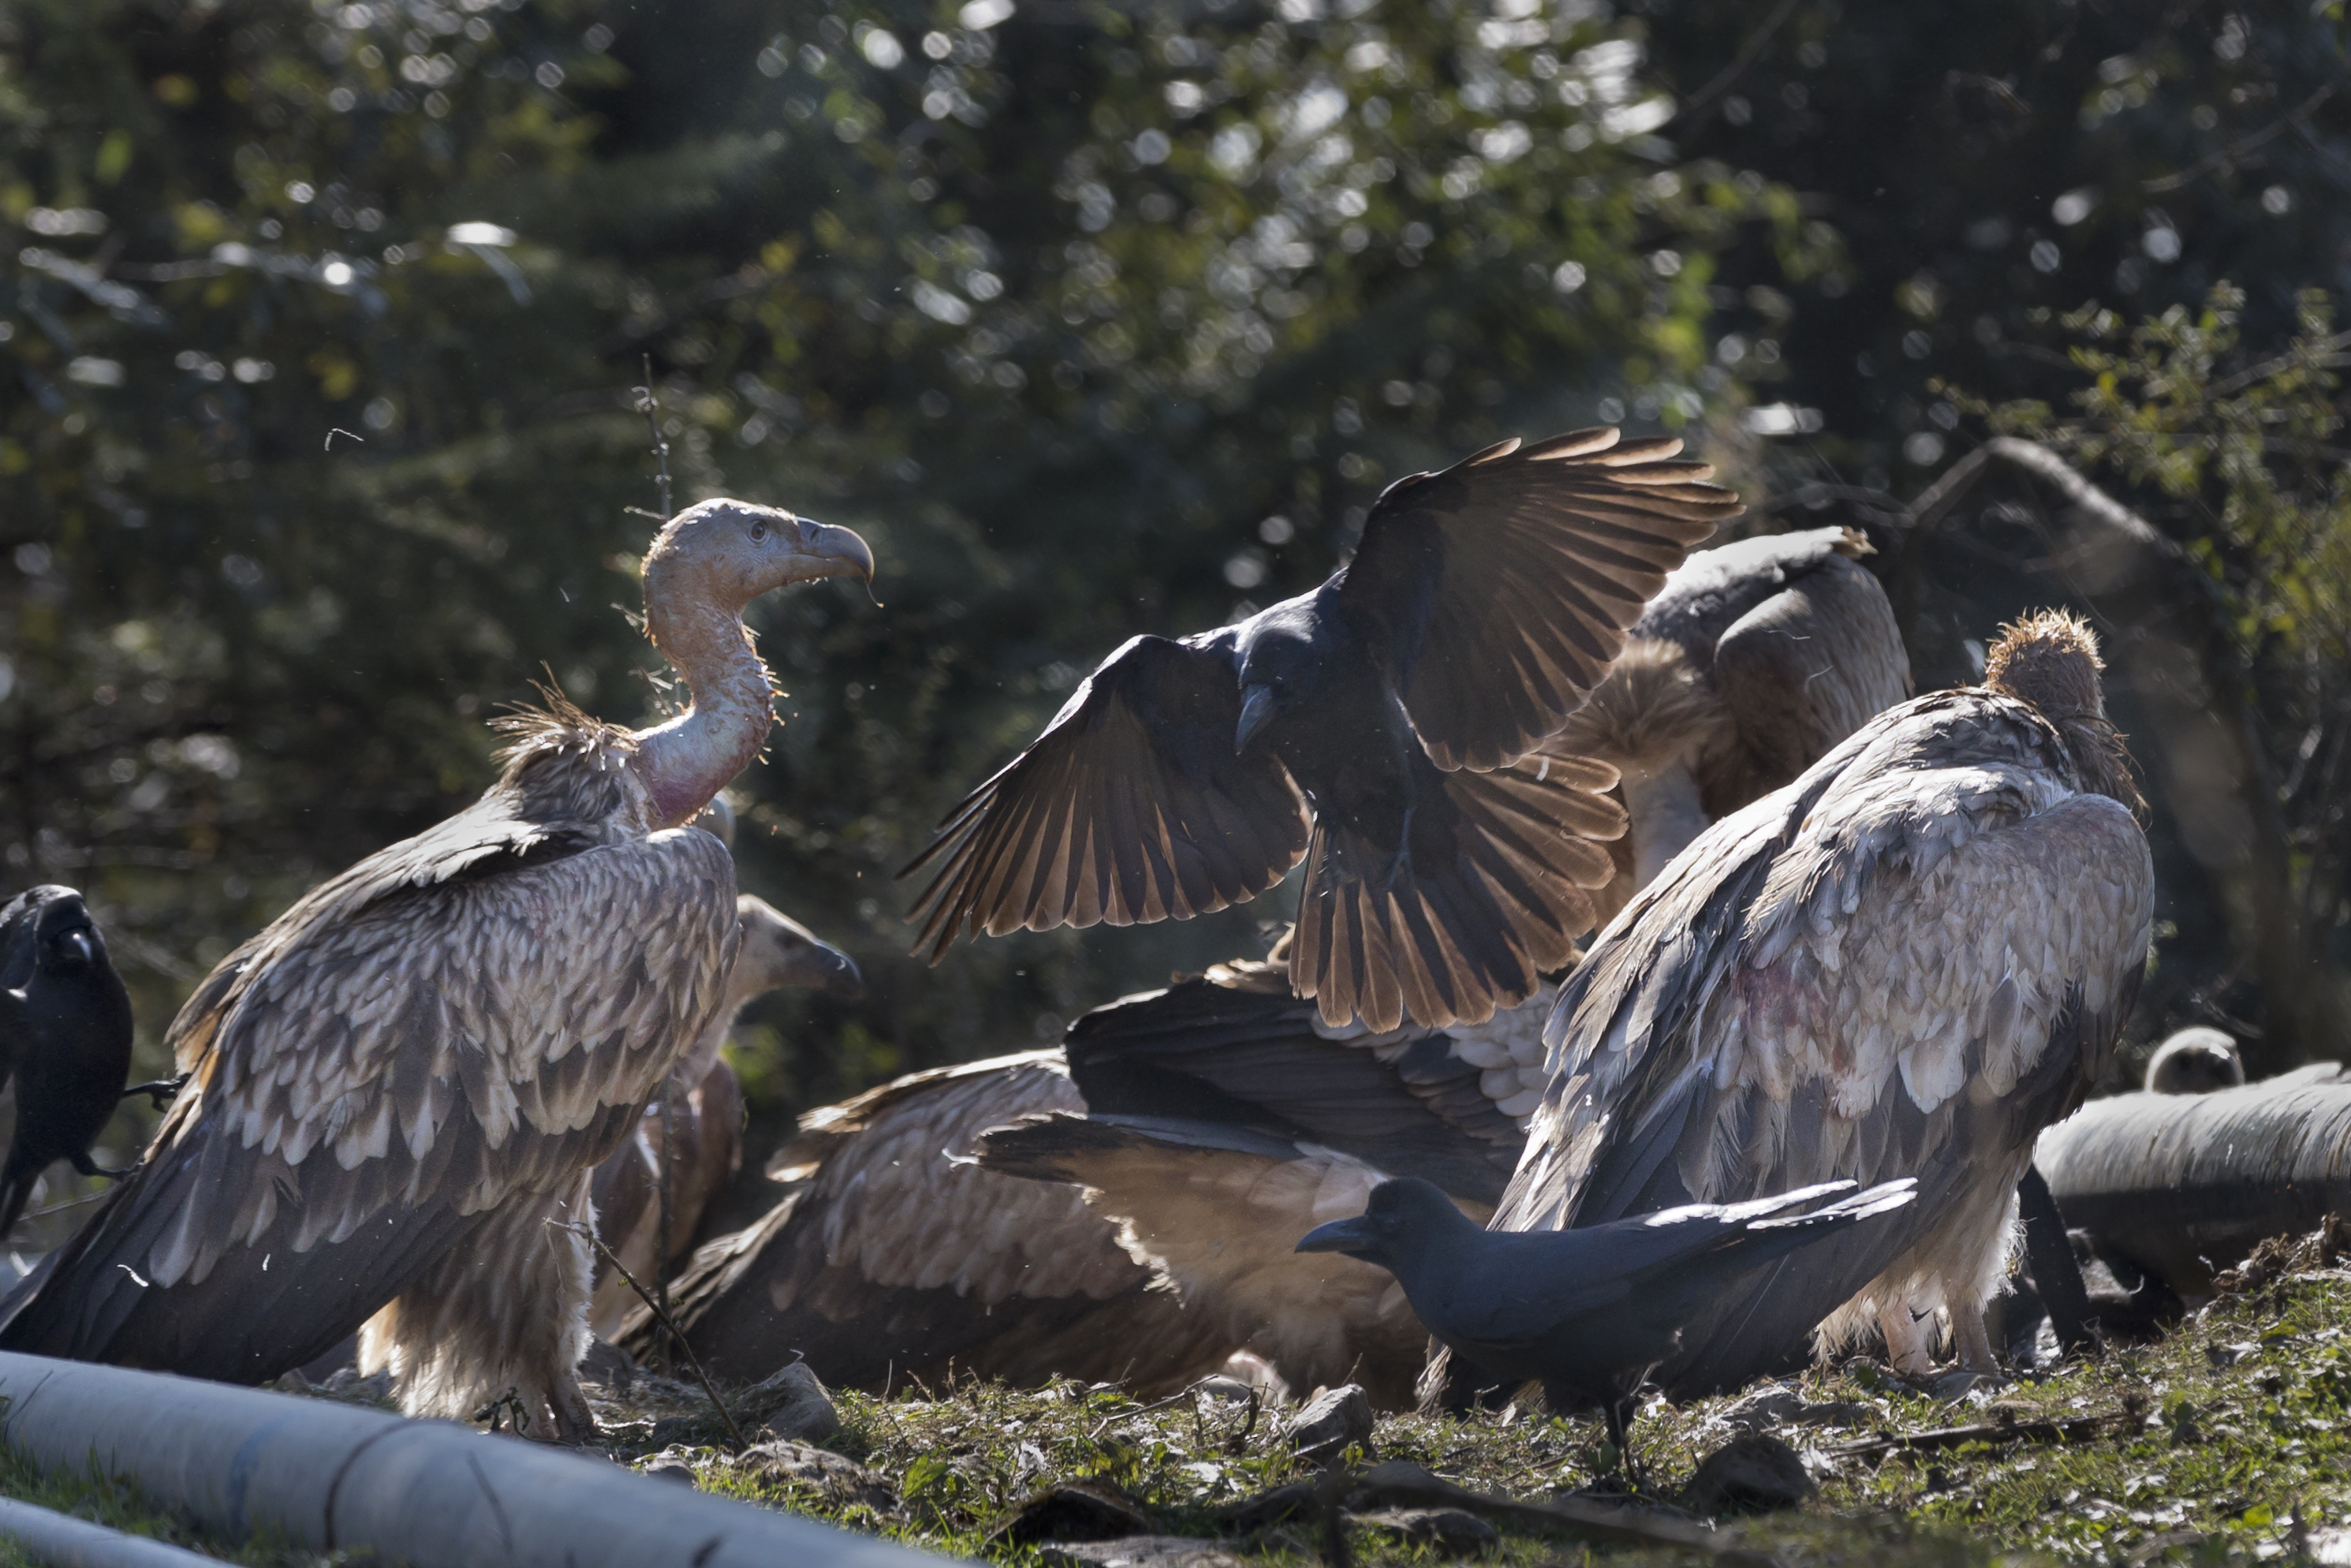 A crow lands among a group of Himalayan Griffon vultures feeding on a carcass in Dharmsala - AP